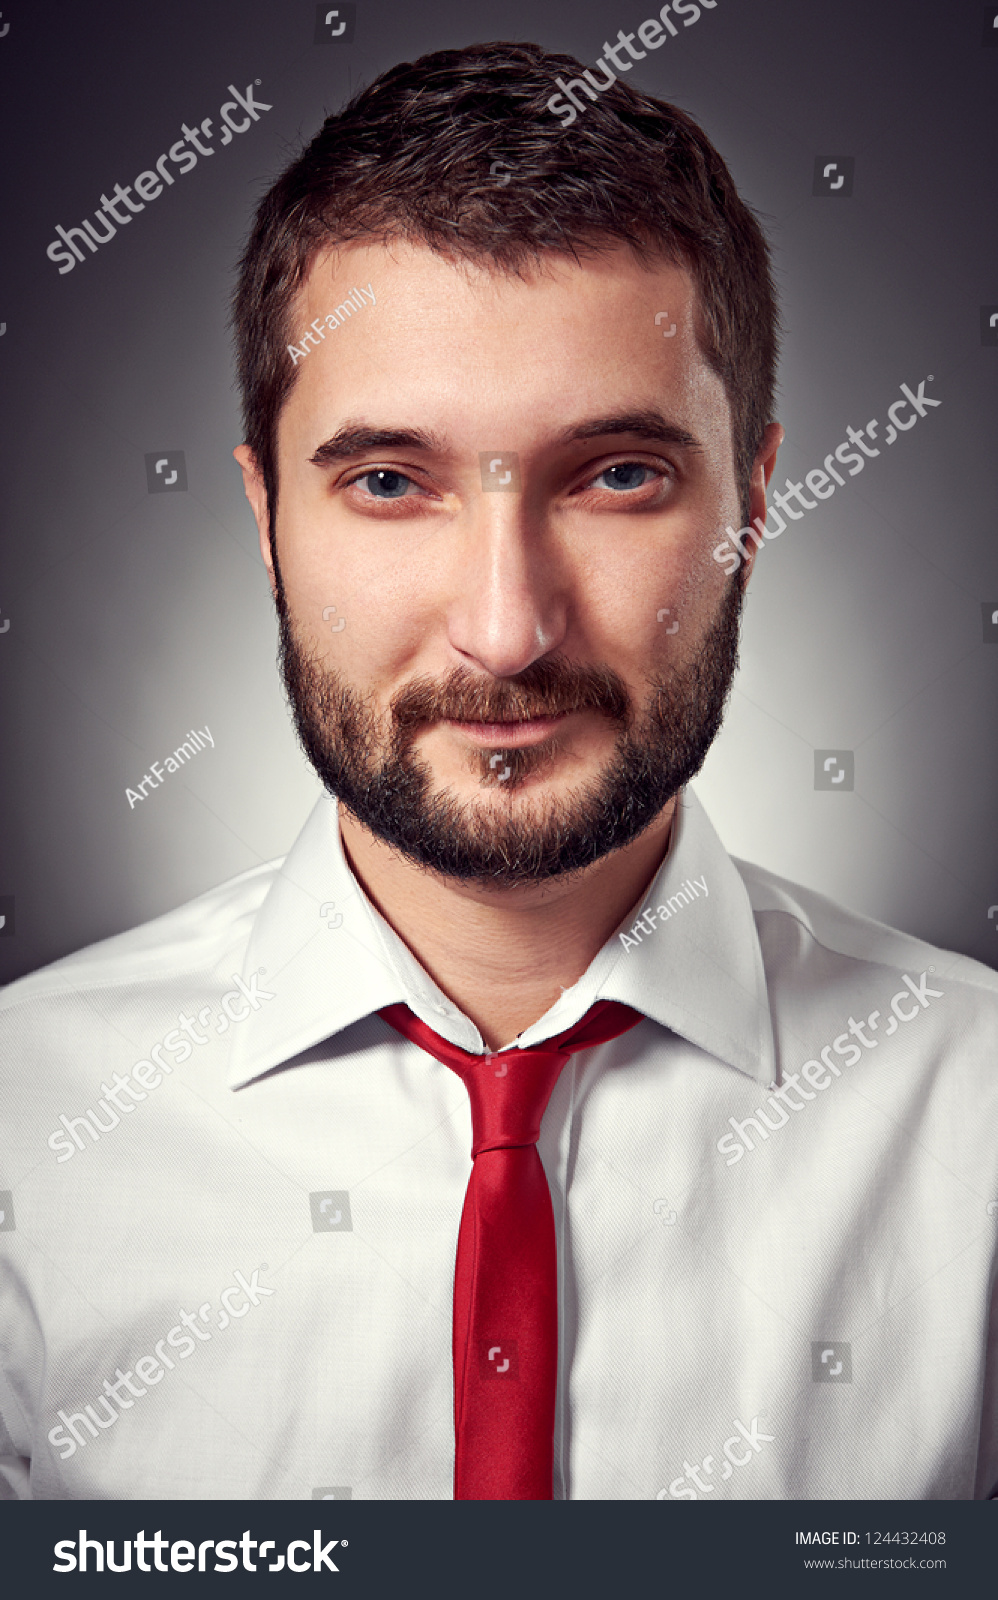 portrait of handsome man in white shirt and red necktie over grey background #124432408